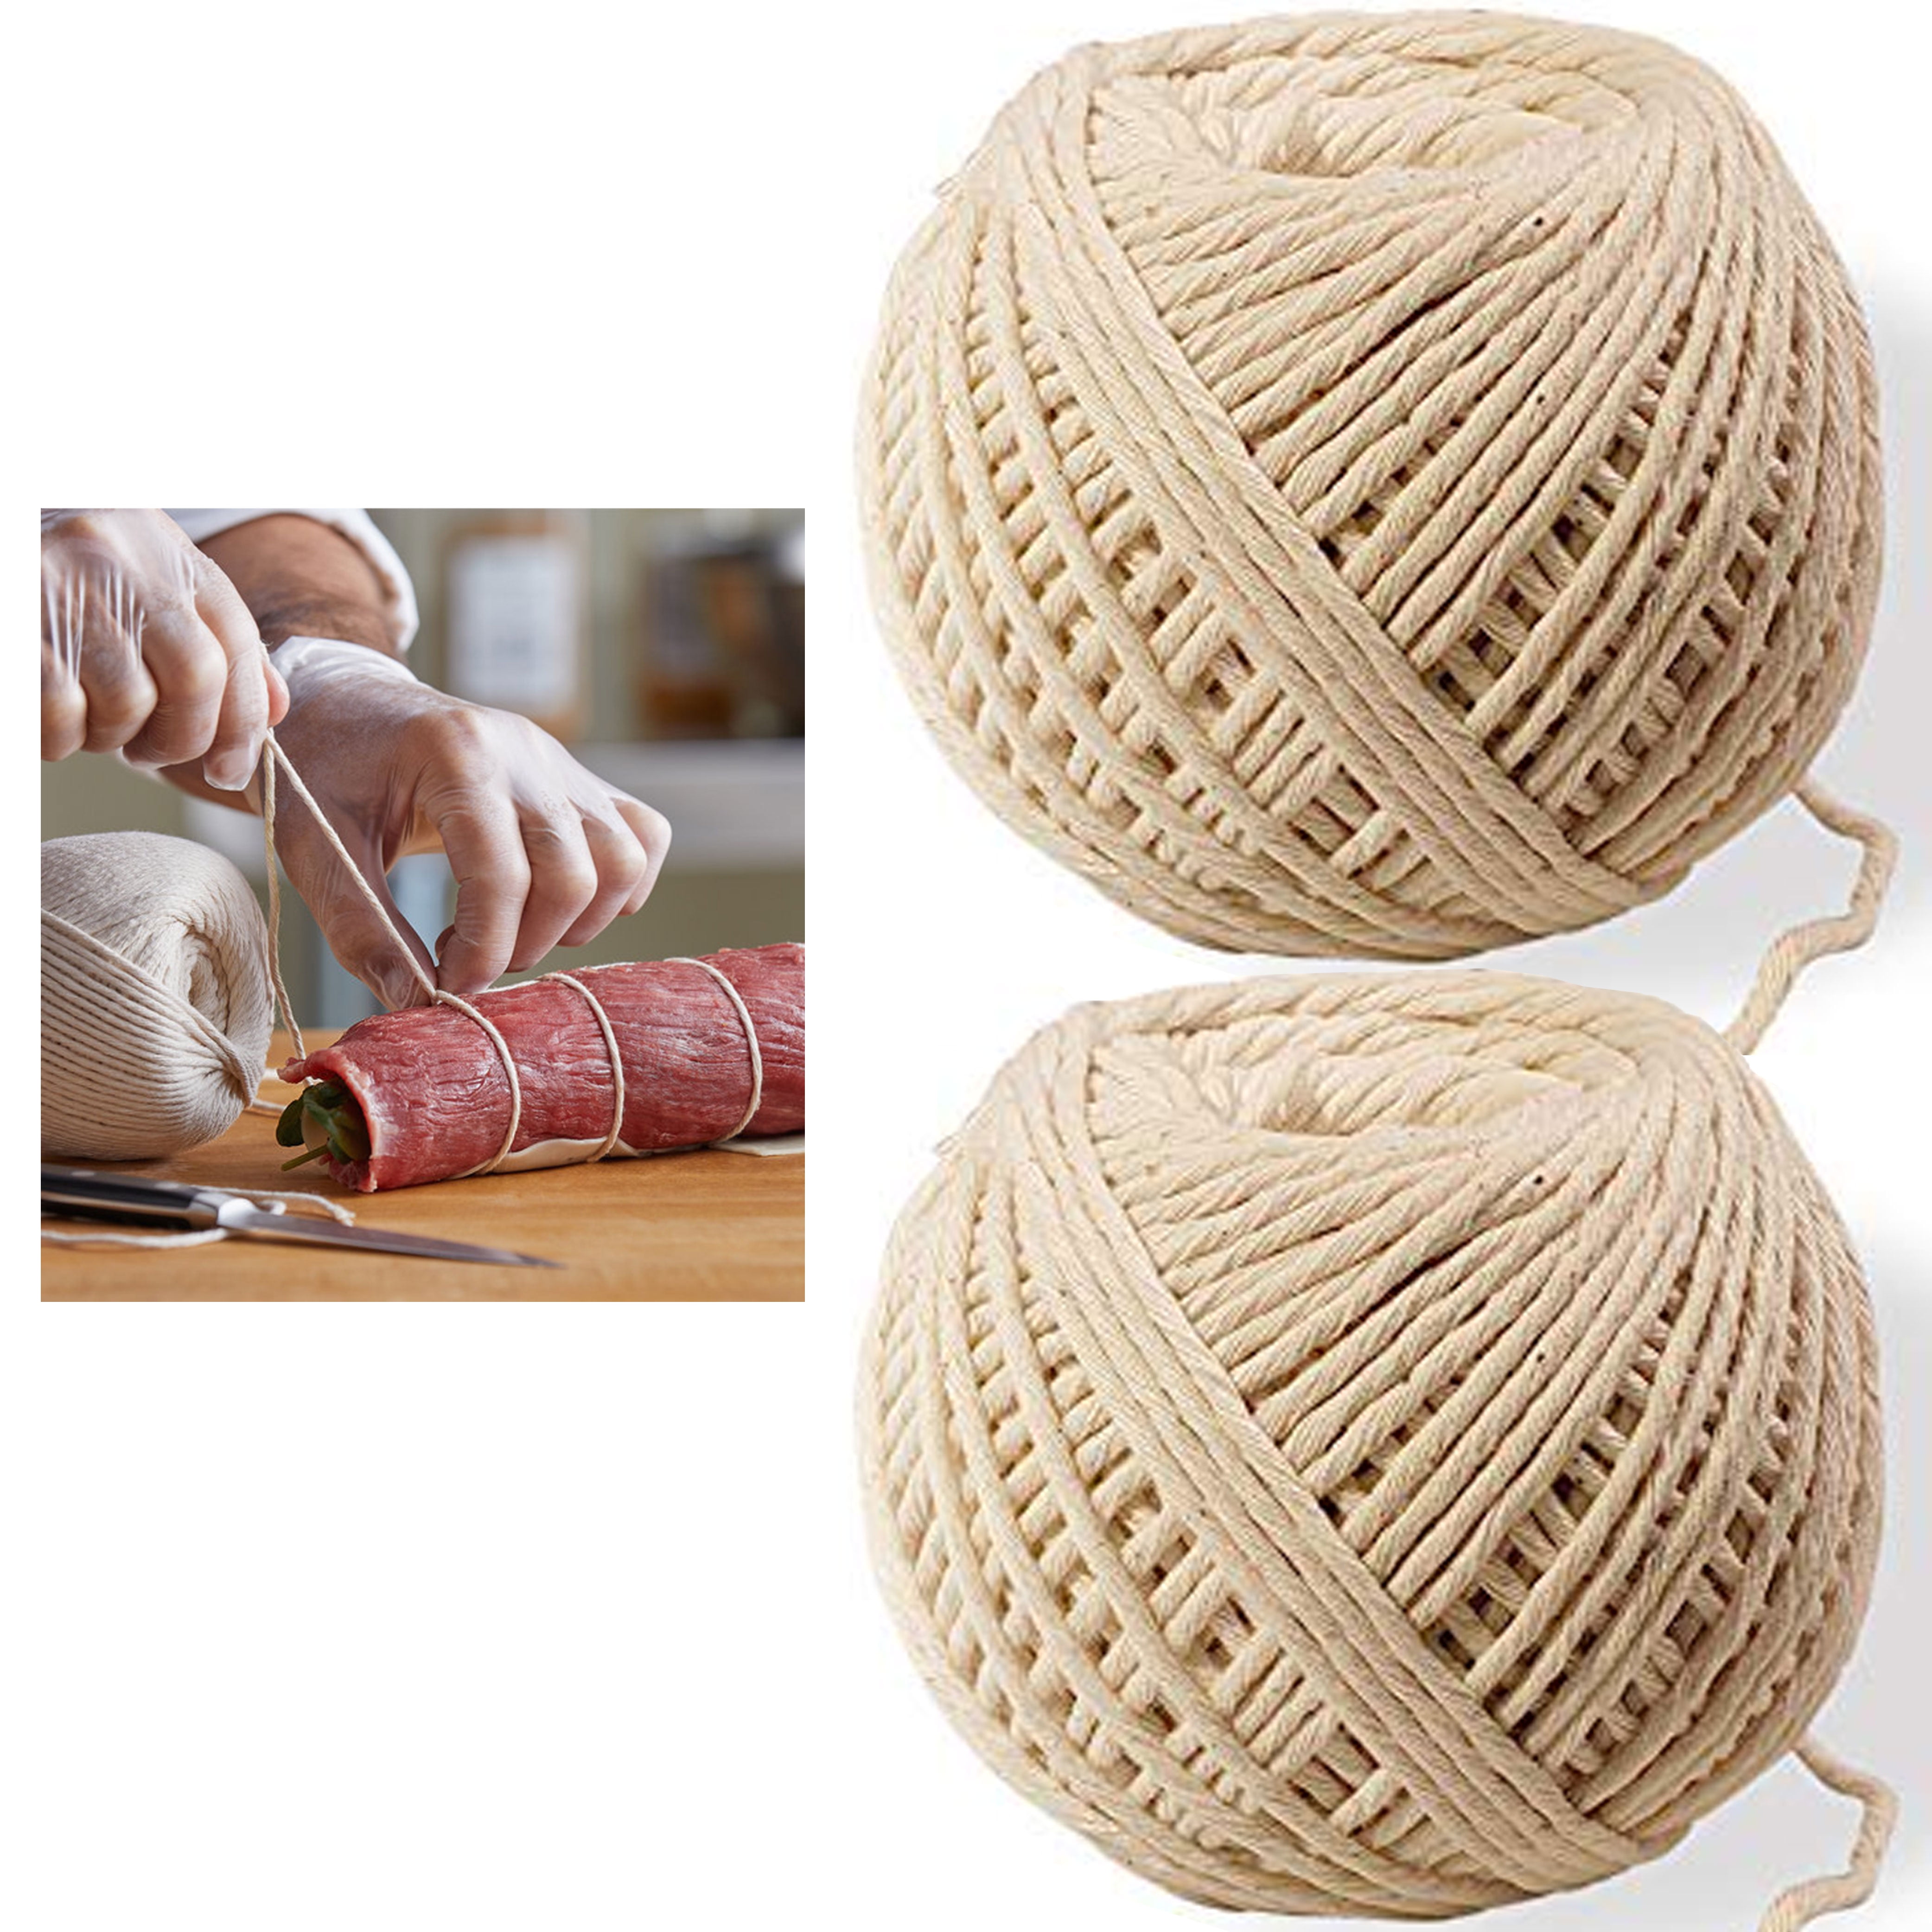 Macrame Cord,Natural White String,100 M Thick Cotton String Twine Making Sausage Safe Cooking String for Tying Homemade Meat 4 MM Strong and Durable Bakers Twine